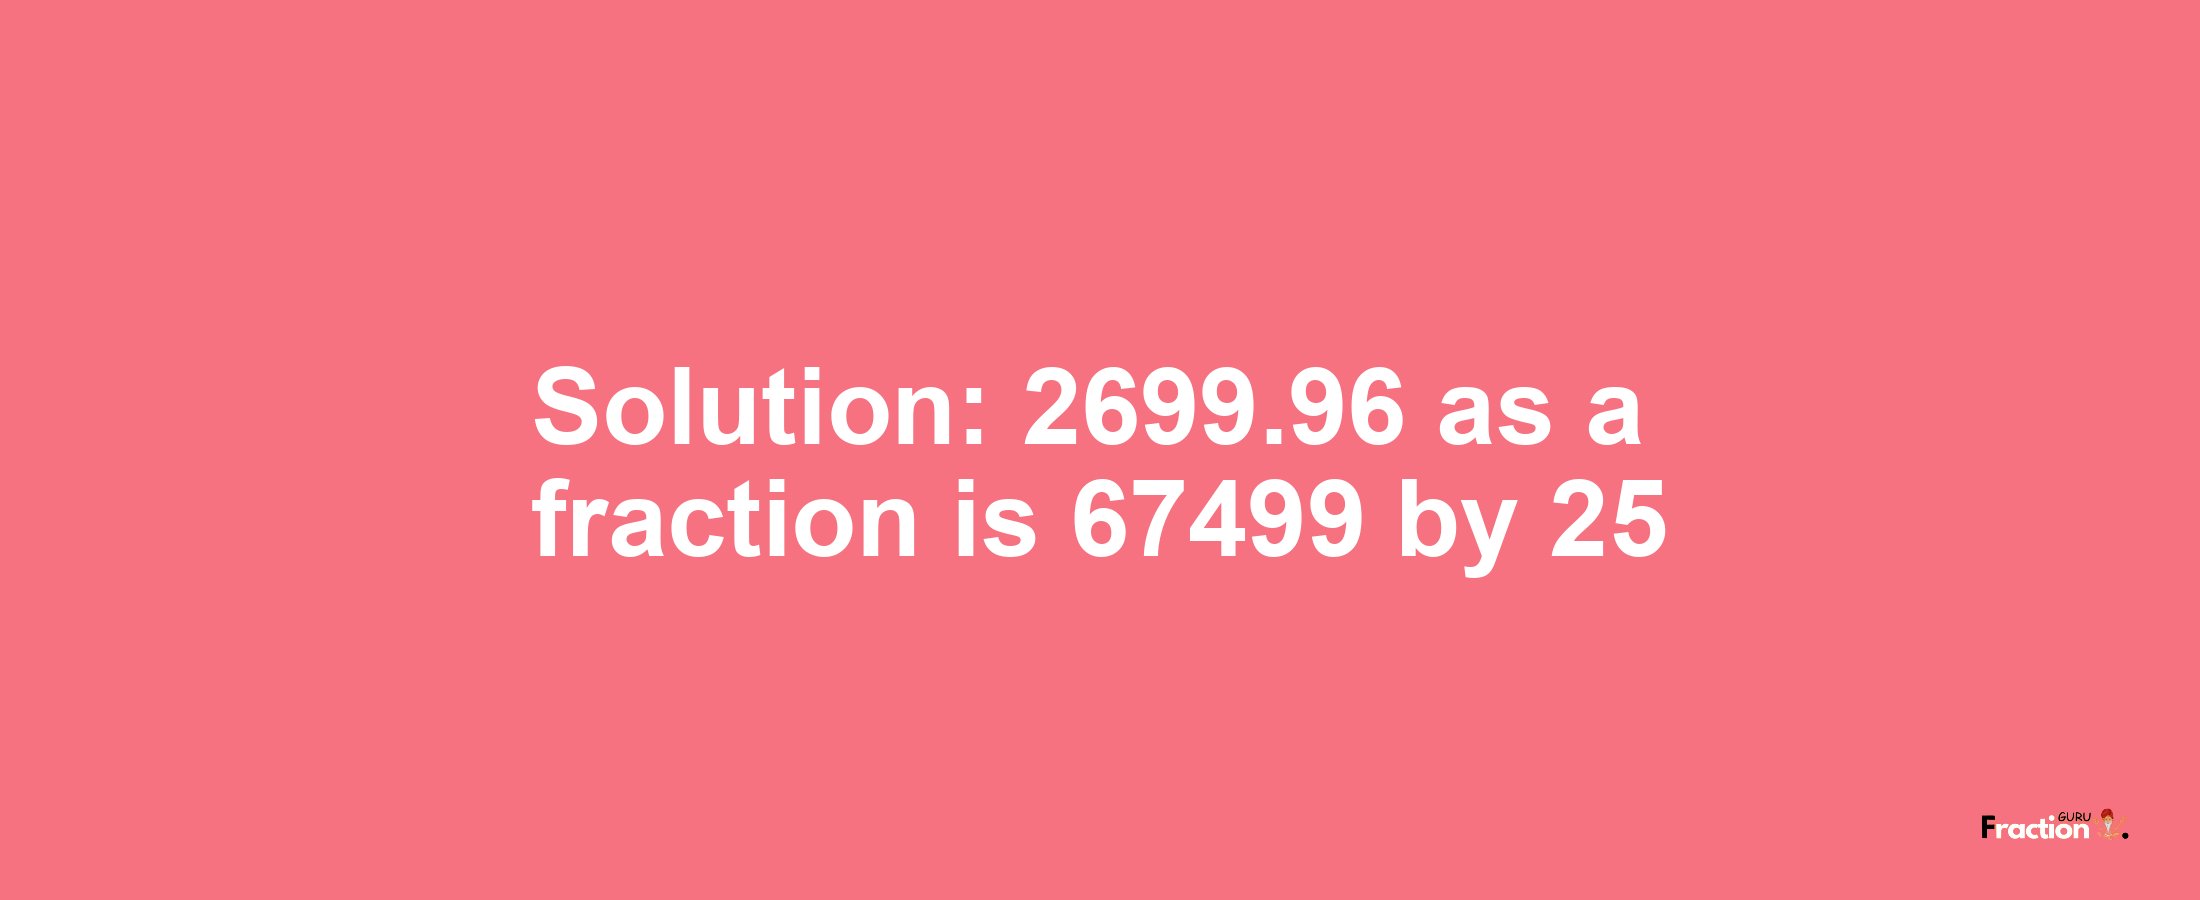 Solution:2699.96 as a fraction is 67499/25